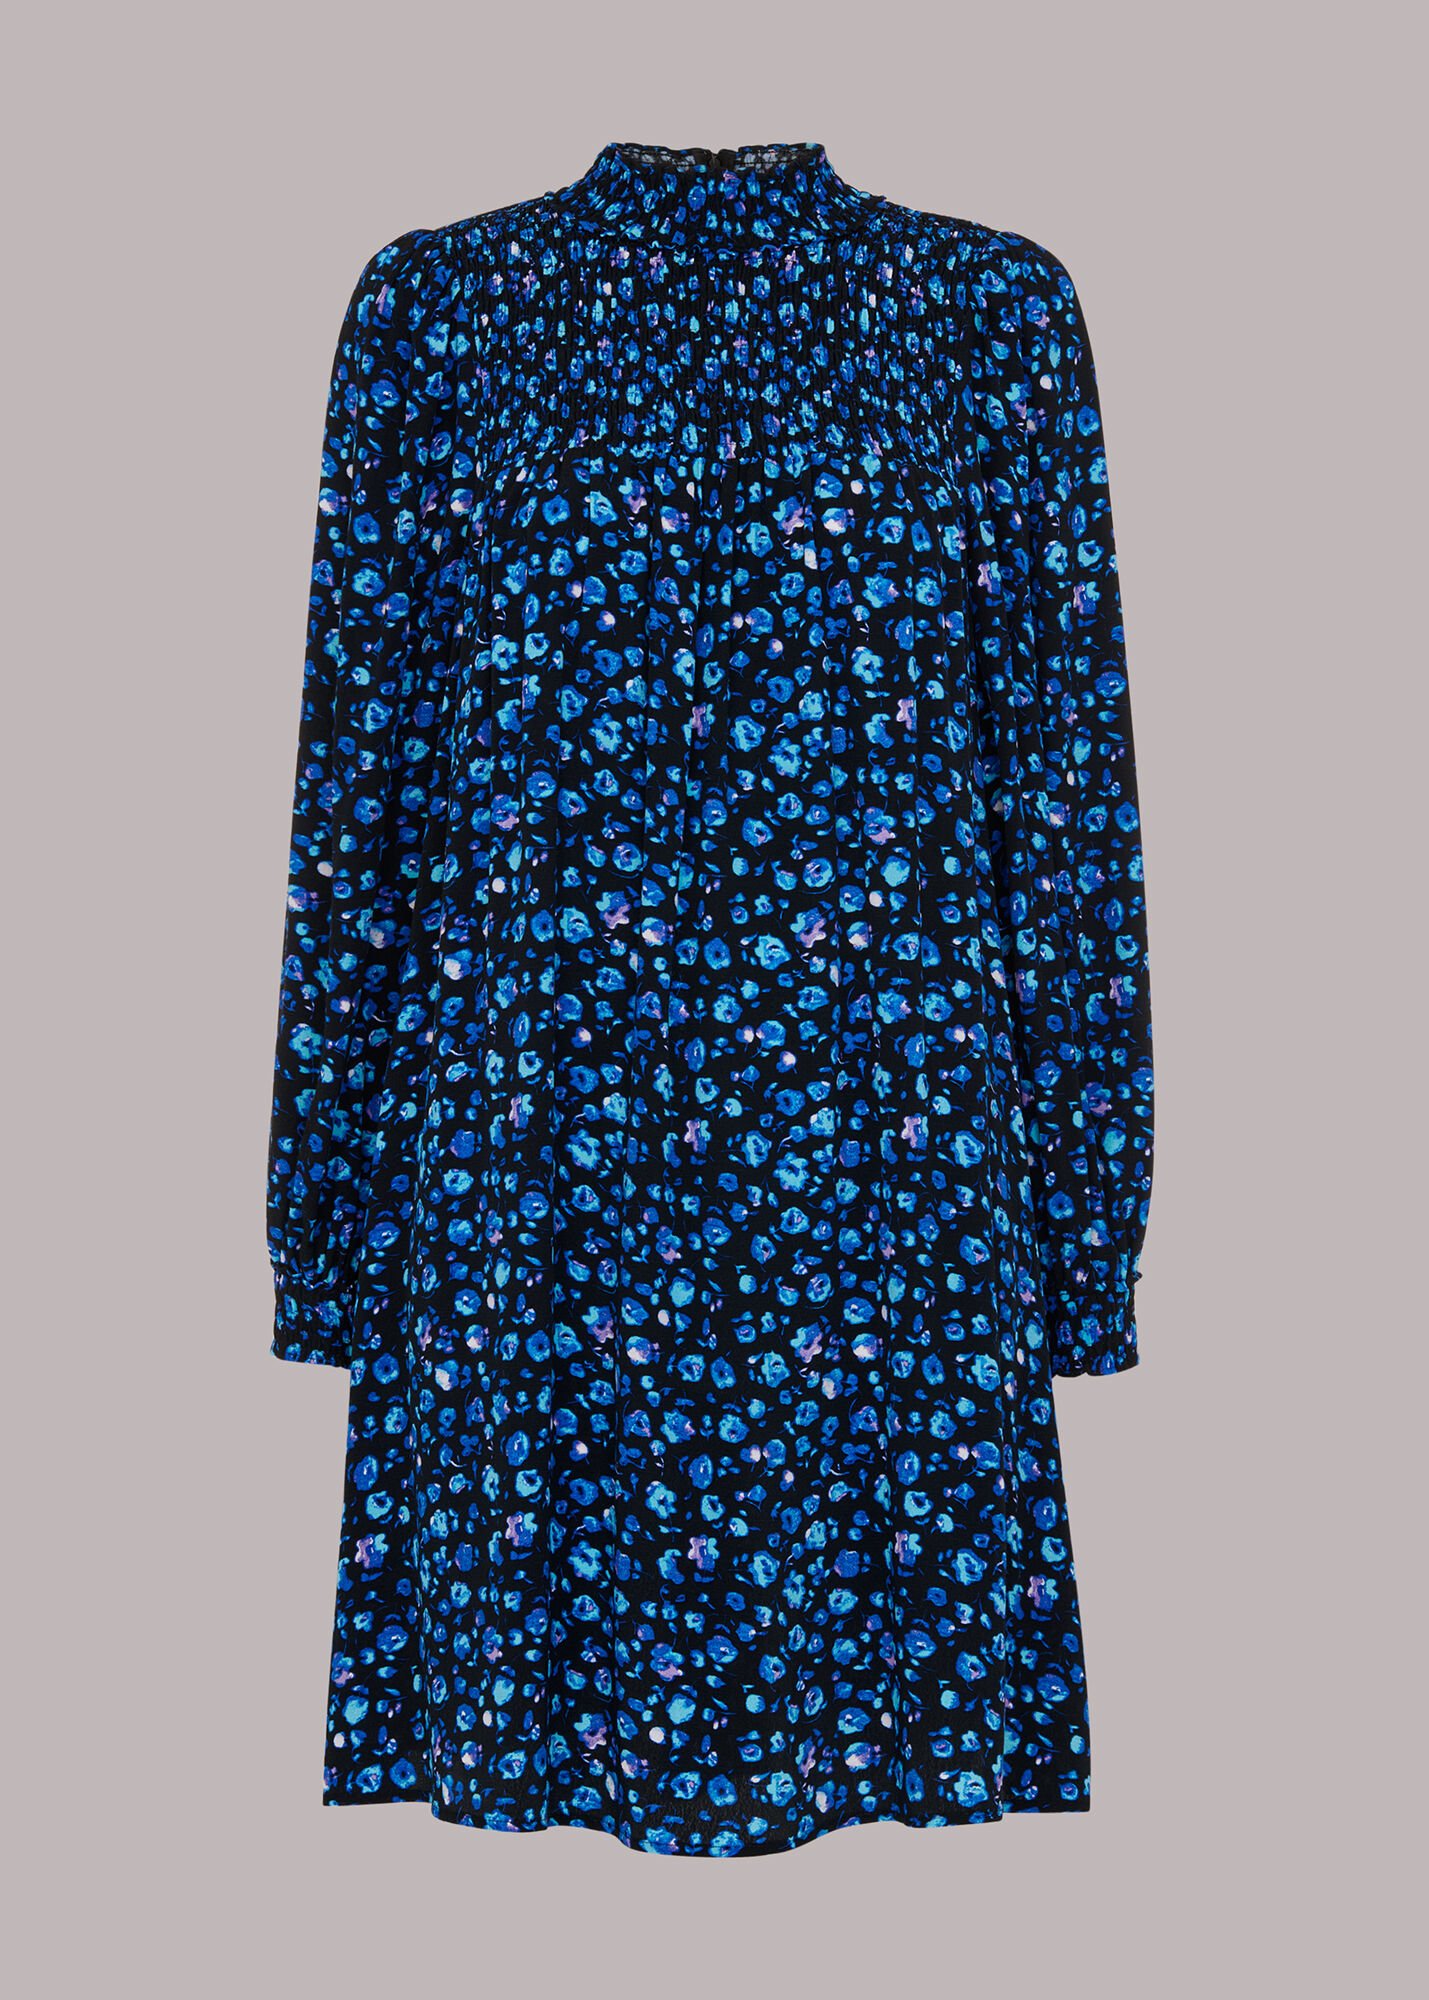 Whistles Blurred Floral Trapeze Dress in Blue.jpg